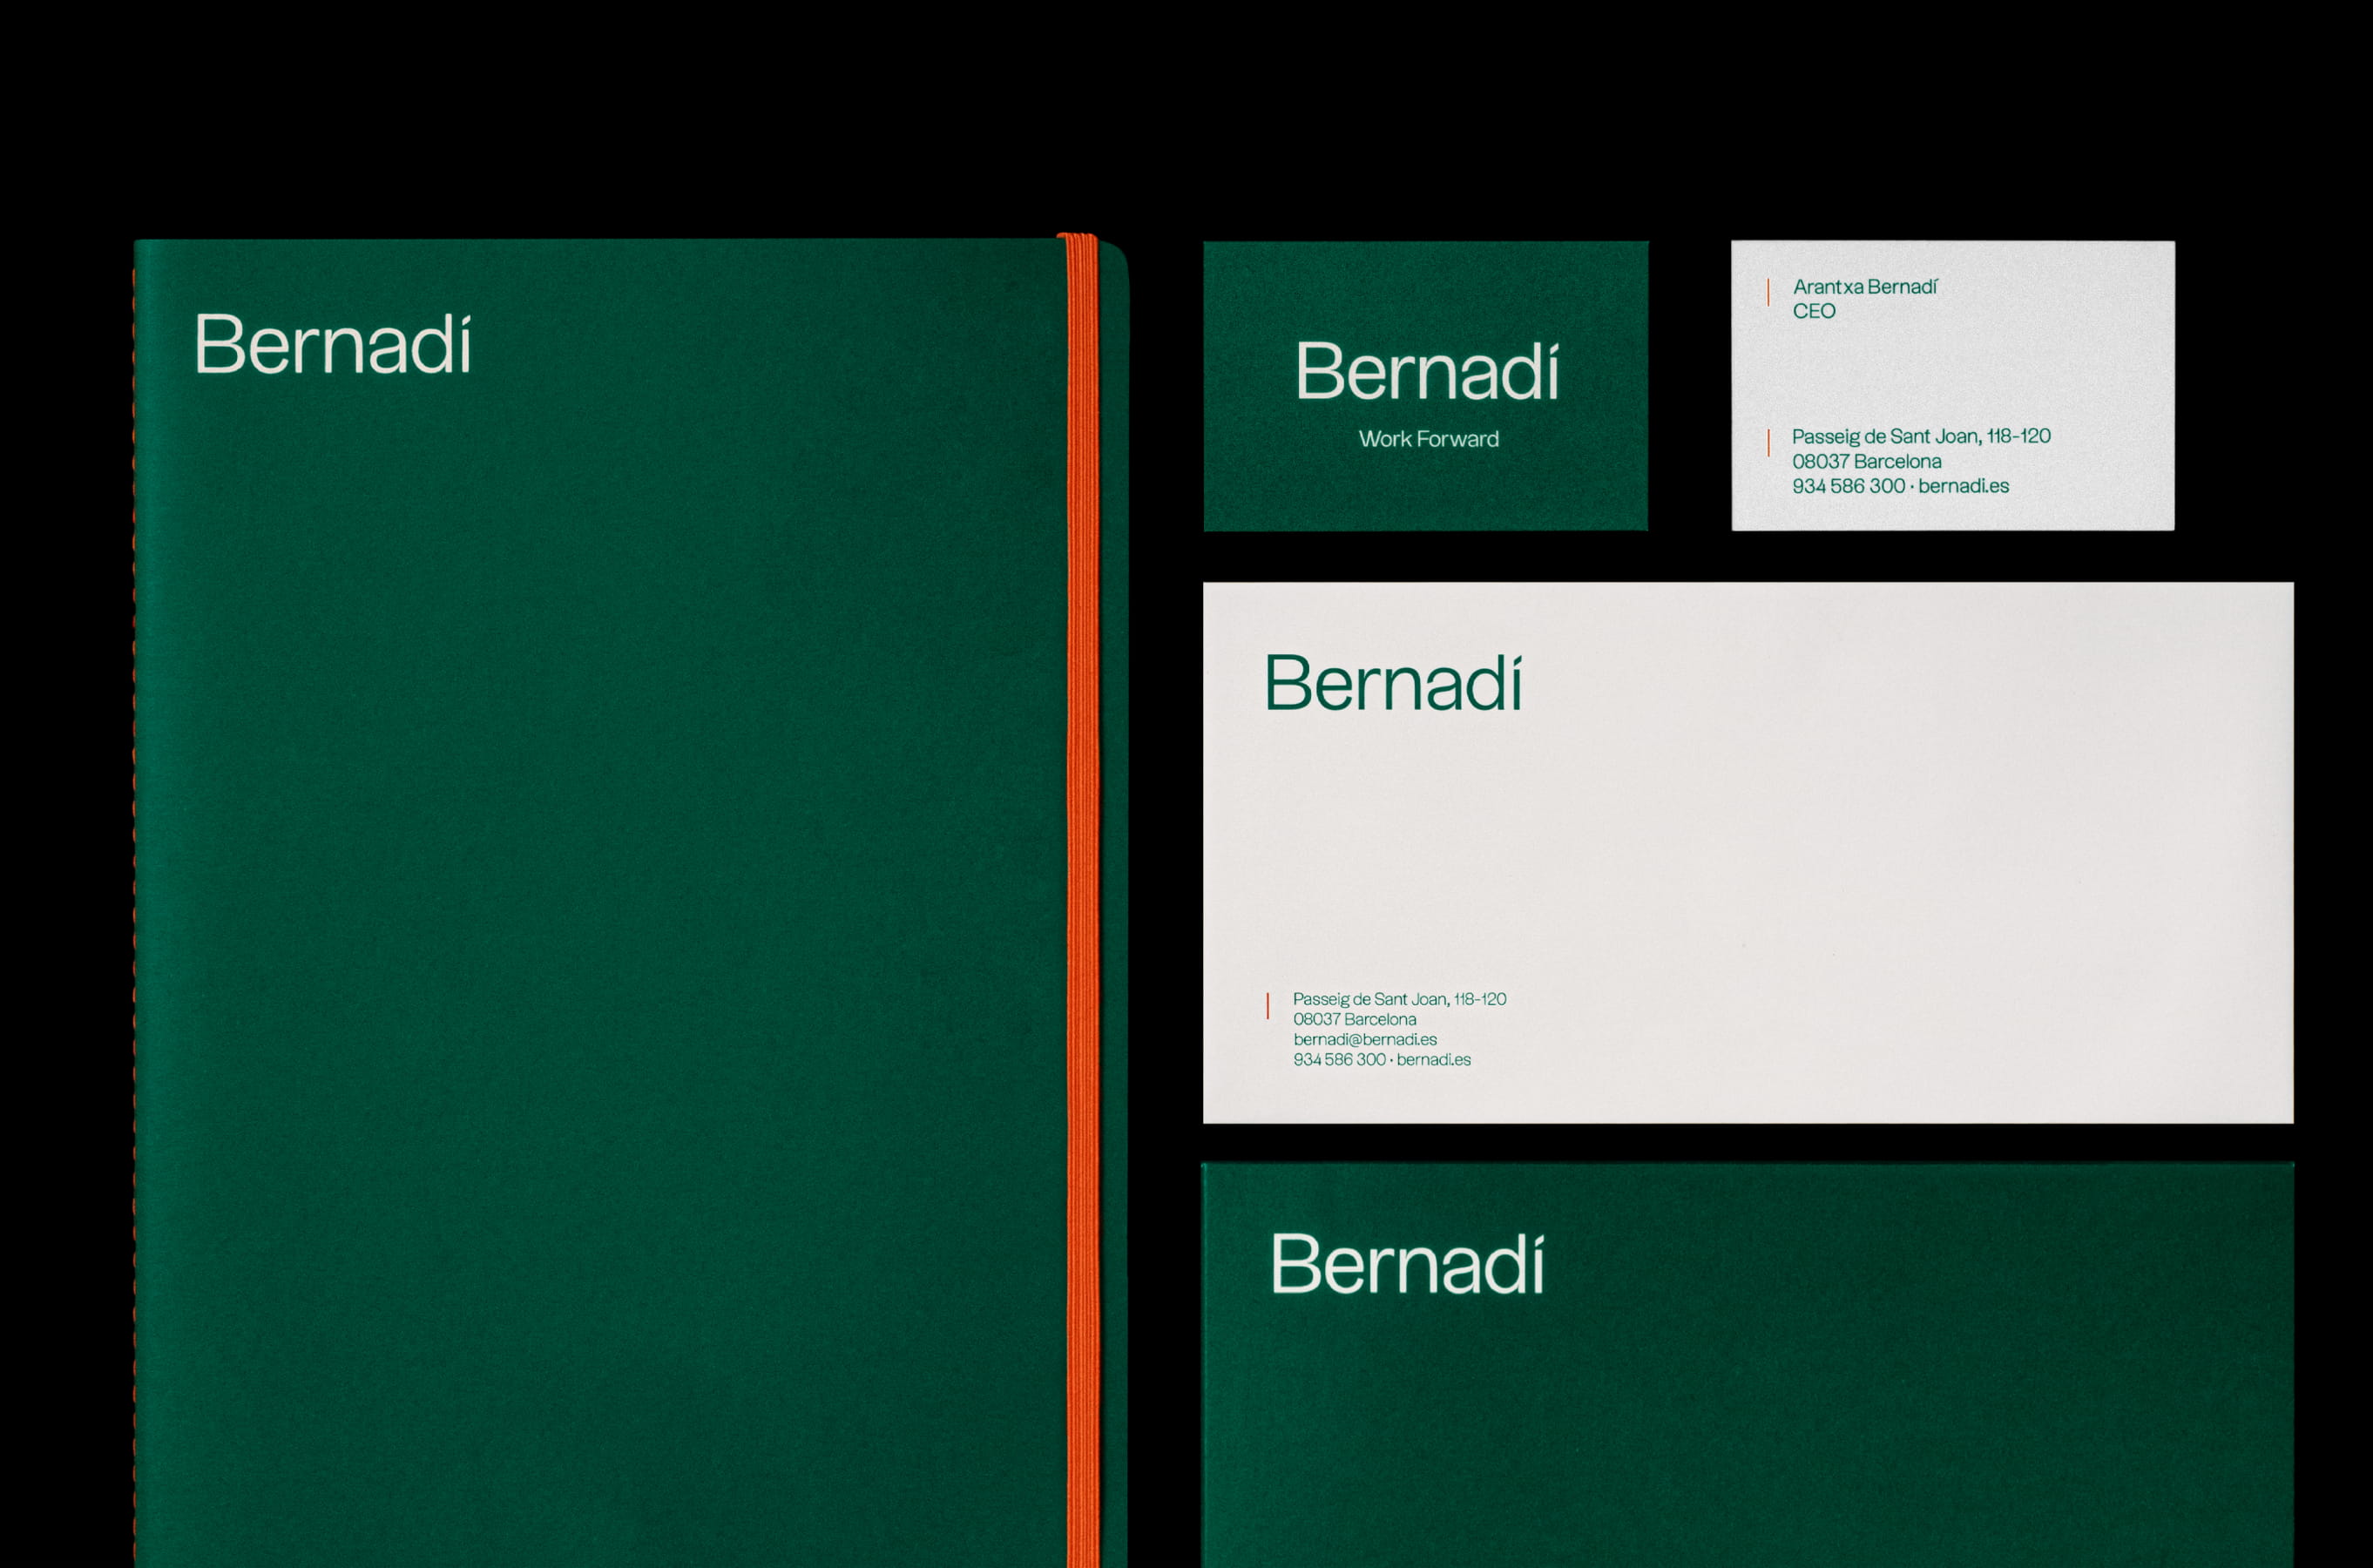 Bernadí is a family business that has become a leader in workplace furniture in Barcelona. However, updating the brand and culture became critical in order to thrive in new competitive contexts.
